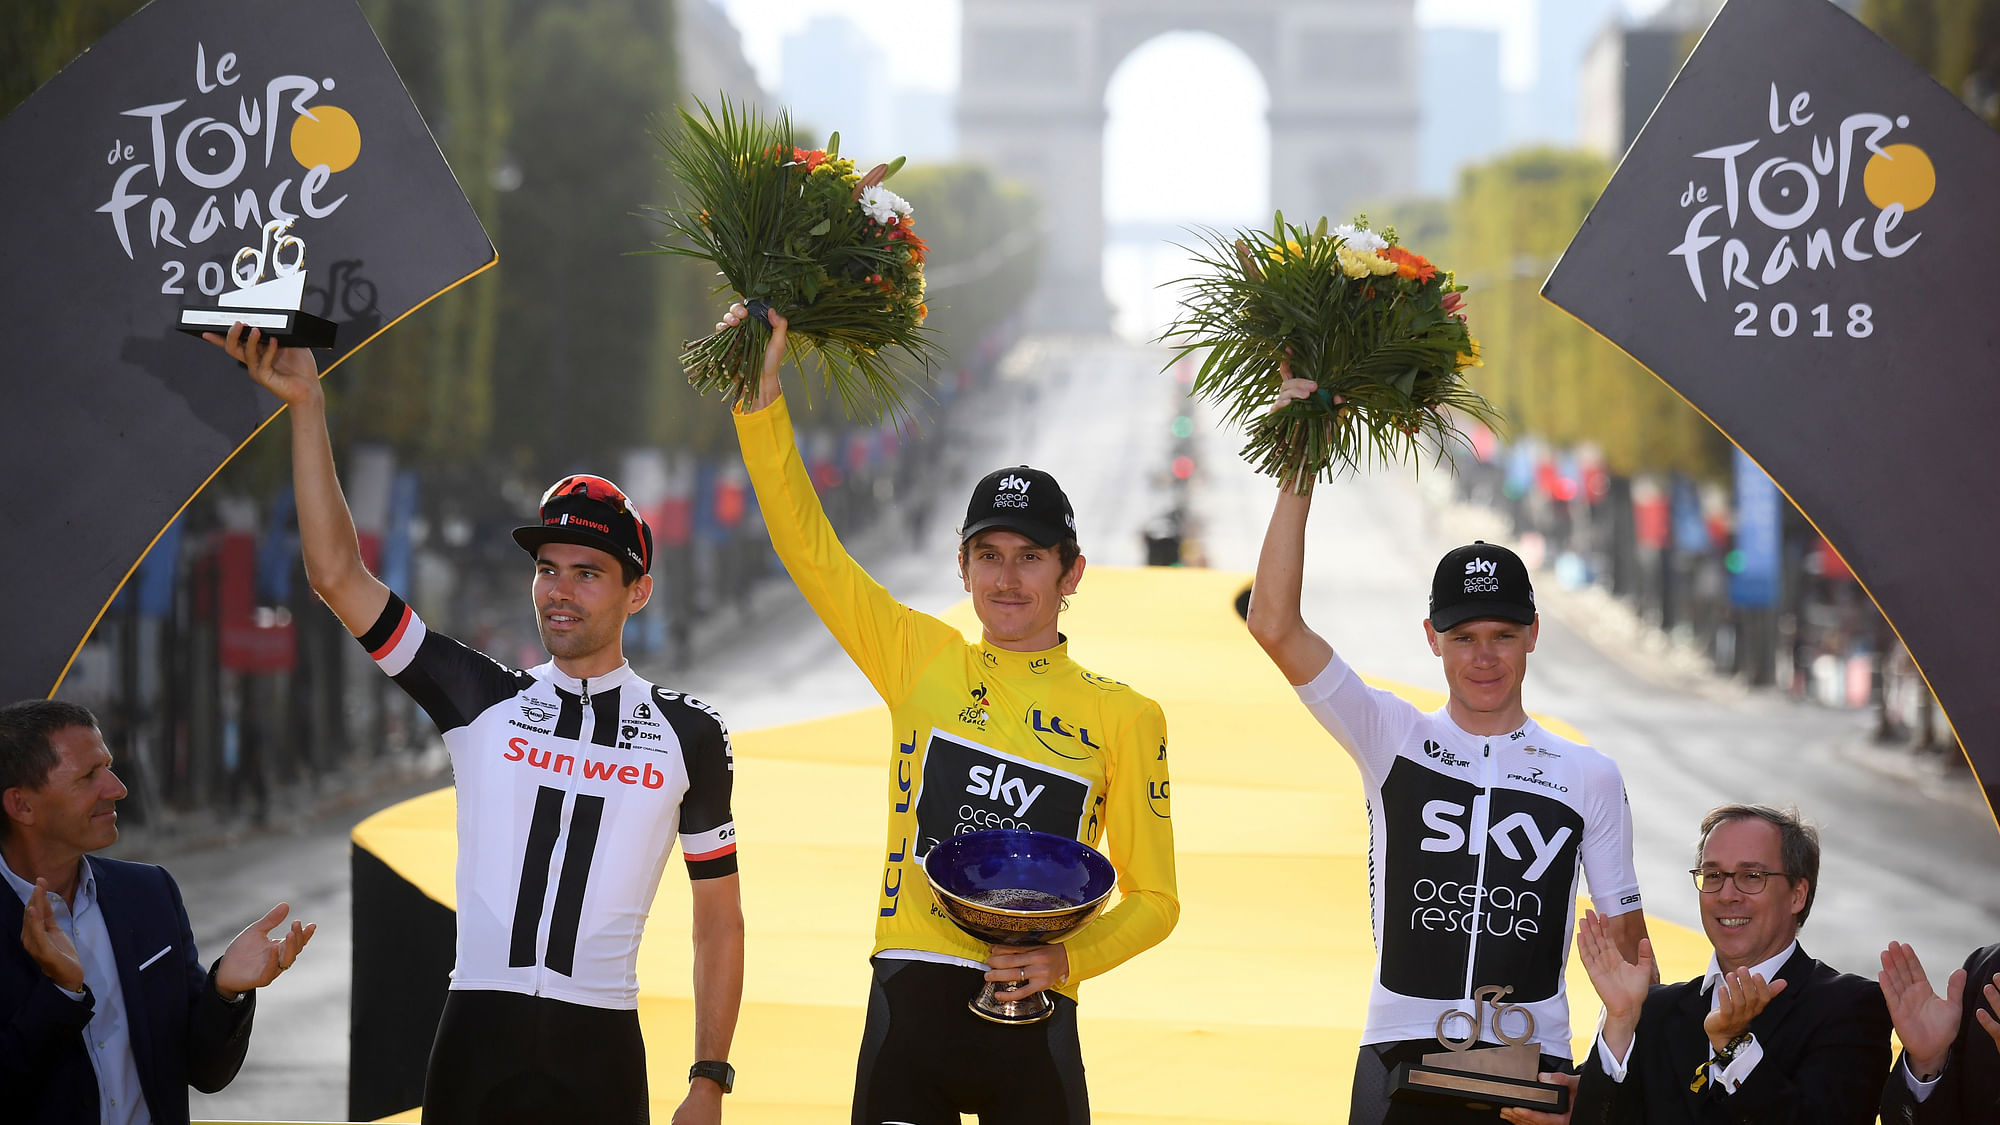 Britain’s Geraint Thomas, wearing the overall leader’s yellow jersey, second place Netherlands’ Tom Dumoulin, left, and third place Britain’s Chris Froome, celebrate on the podium after the twenty-first stage of the Tour de France cycling race over 116 kilometers (72.1 miles) with start in Houilles and finish on Champs-Elysees avenue in Paris, France, Sunday July 29, 2018.&nbsp;